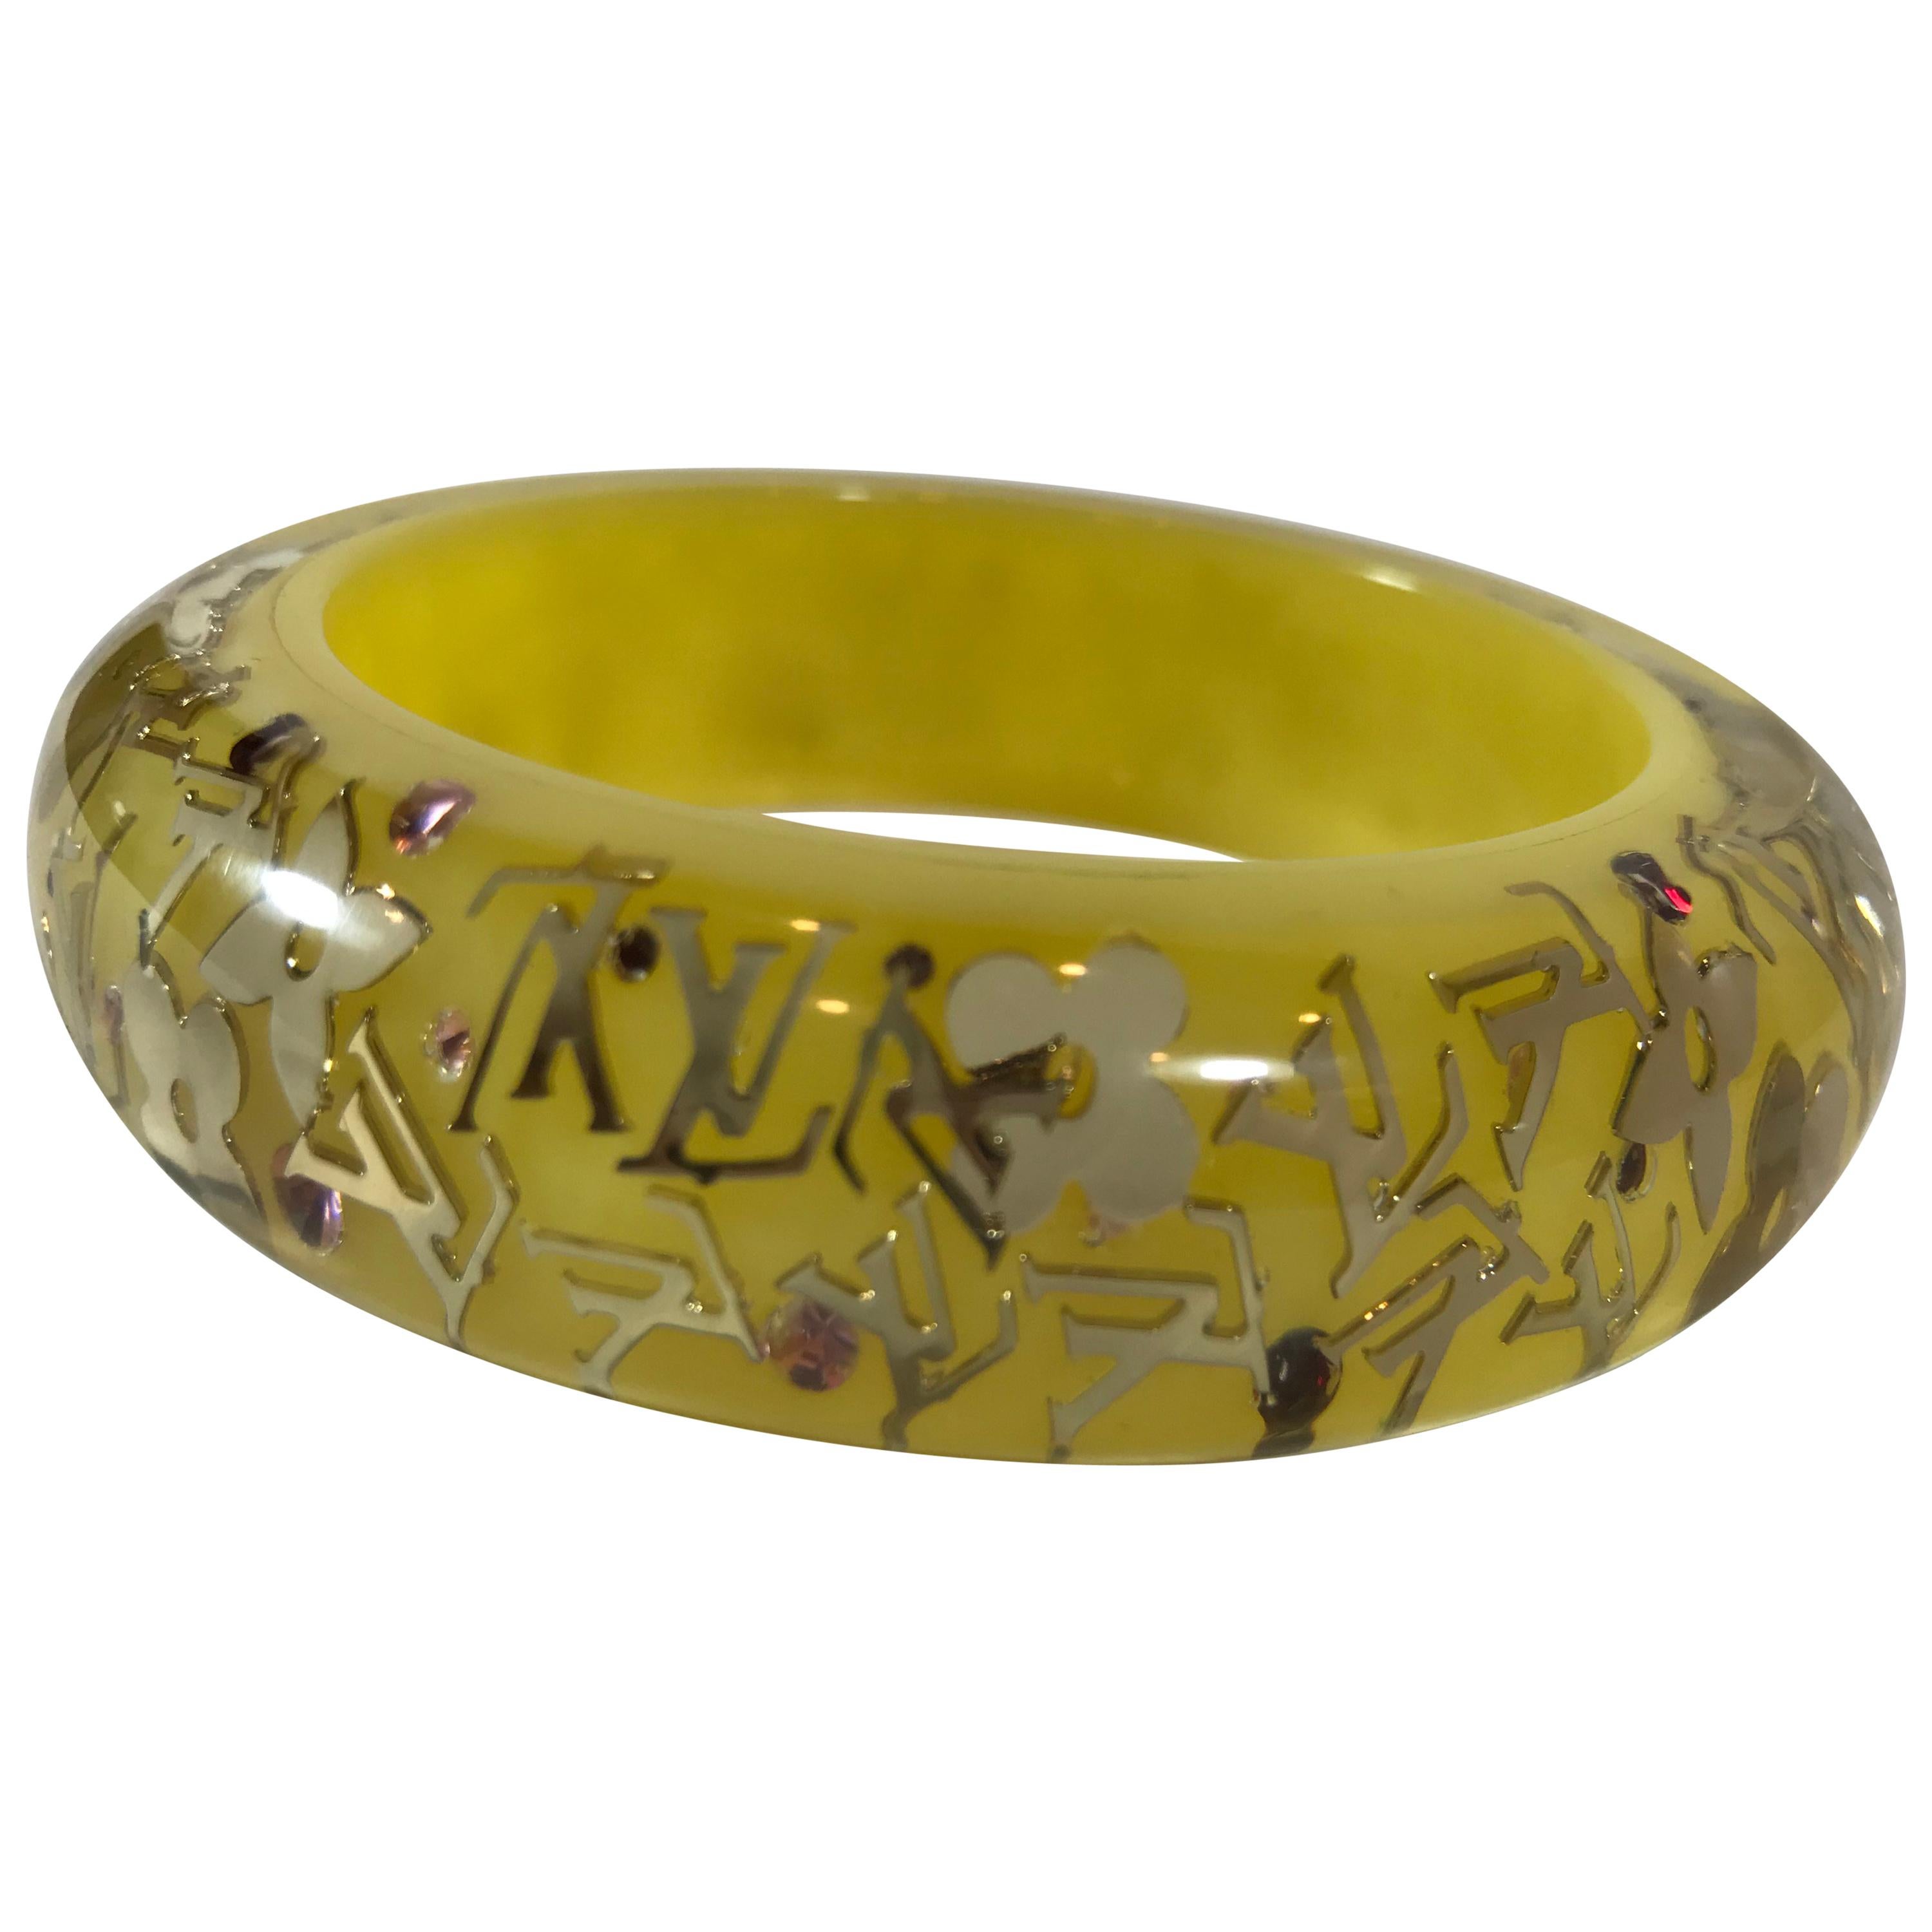 Sold at Auction: Louis Vuitton Black and Gold Inclusion Resin Bangle